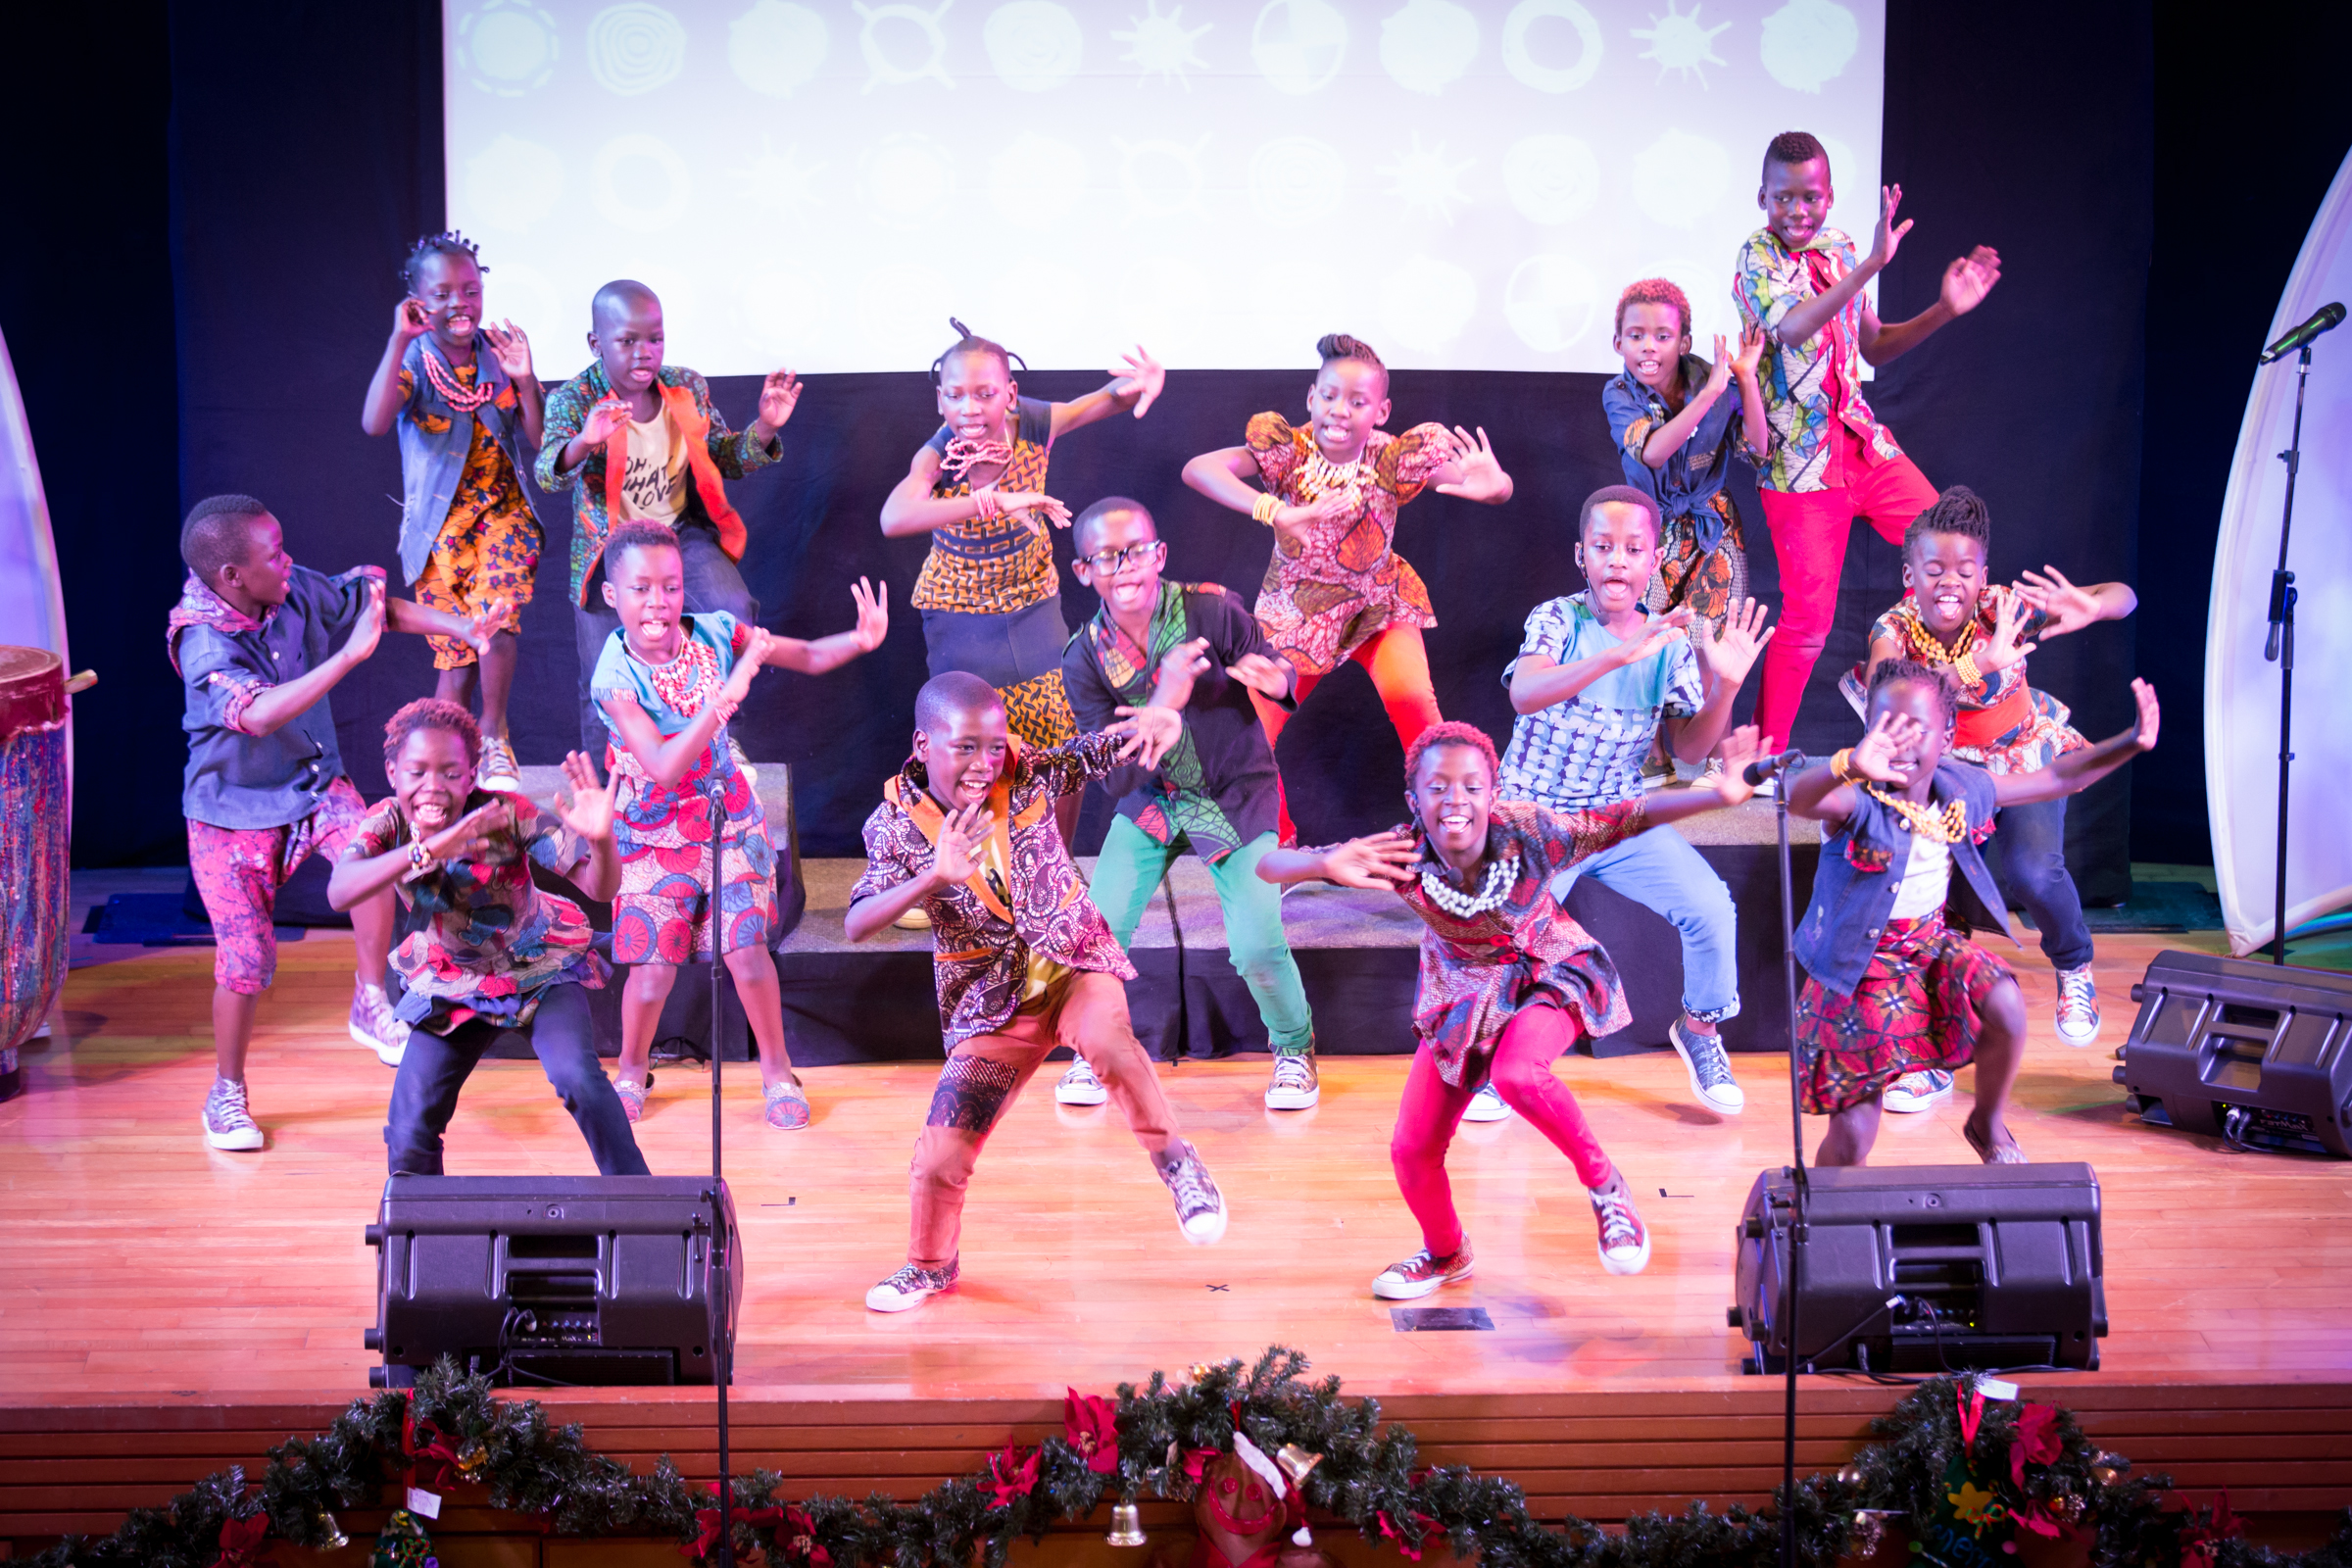 The Watoto children sing, dance and celebrate their stories of hope and love every time they visit us.